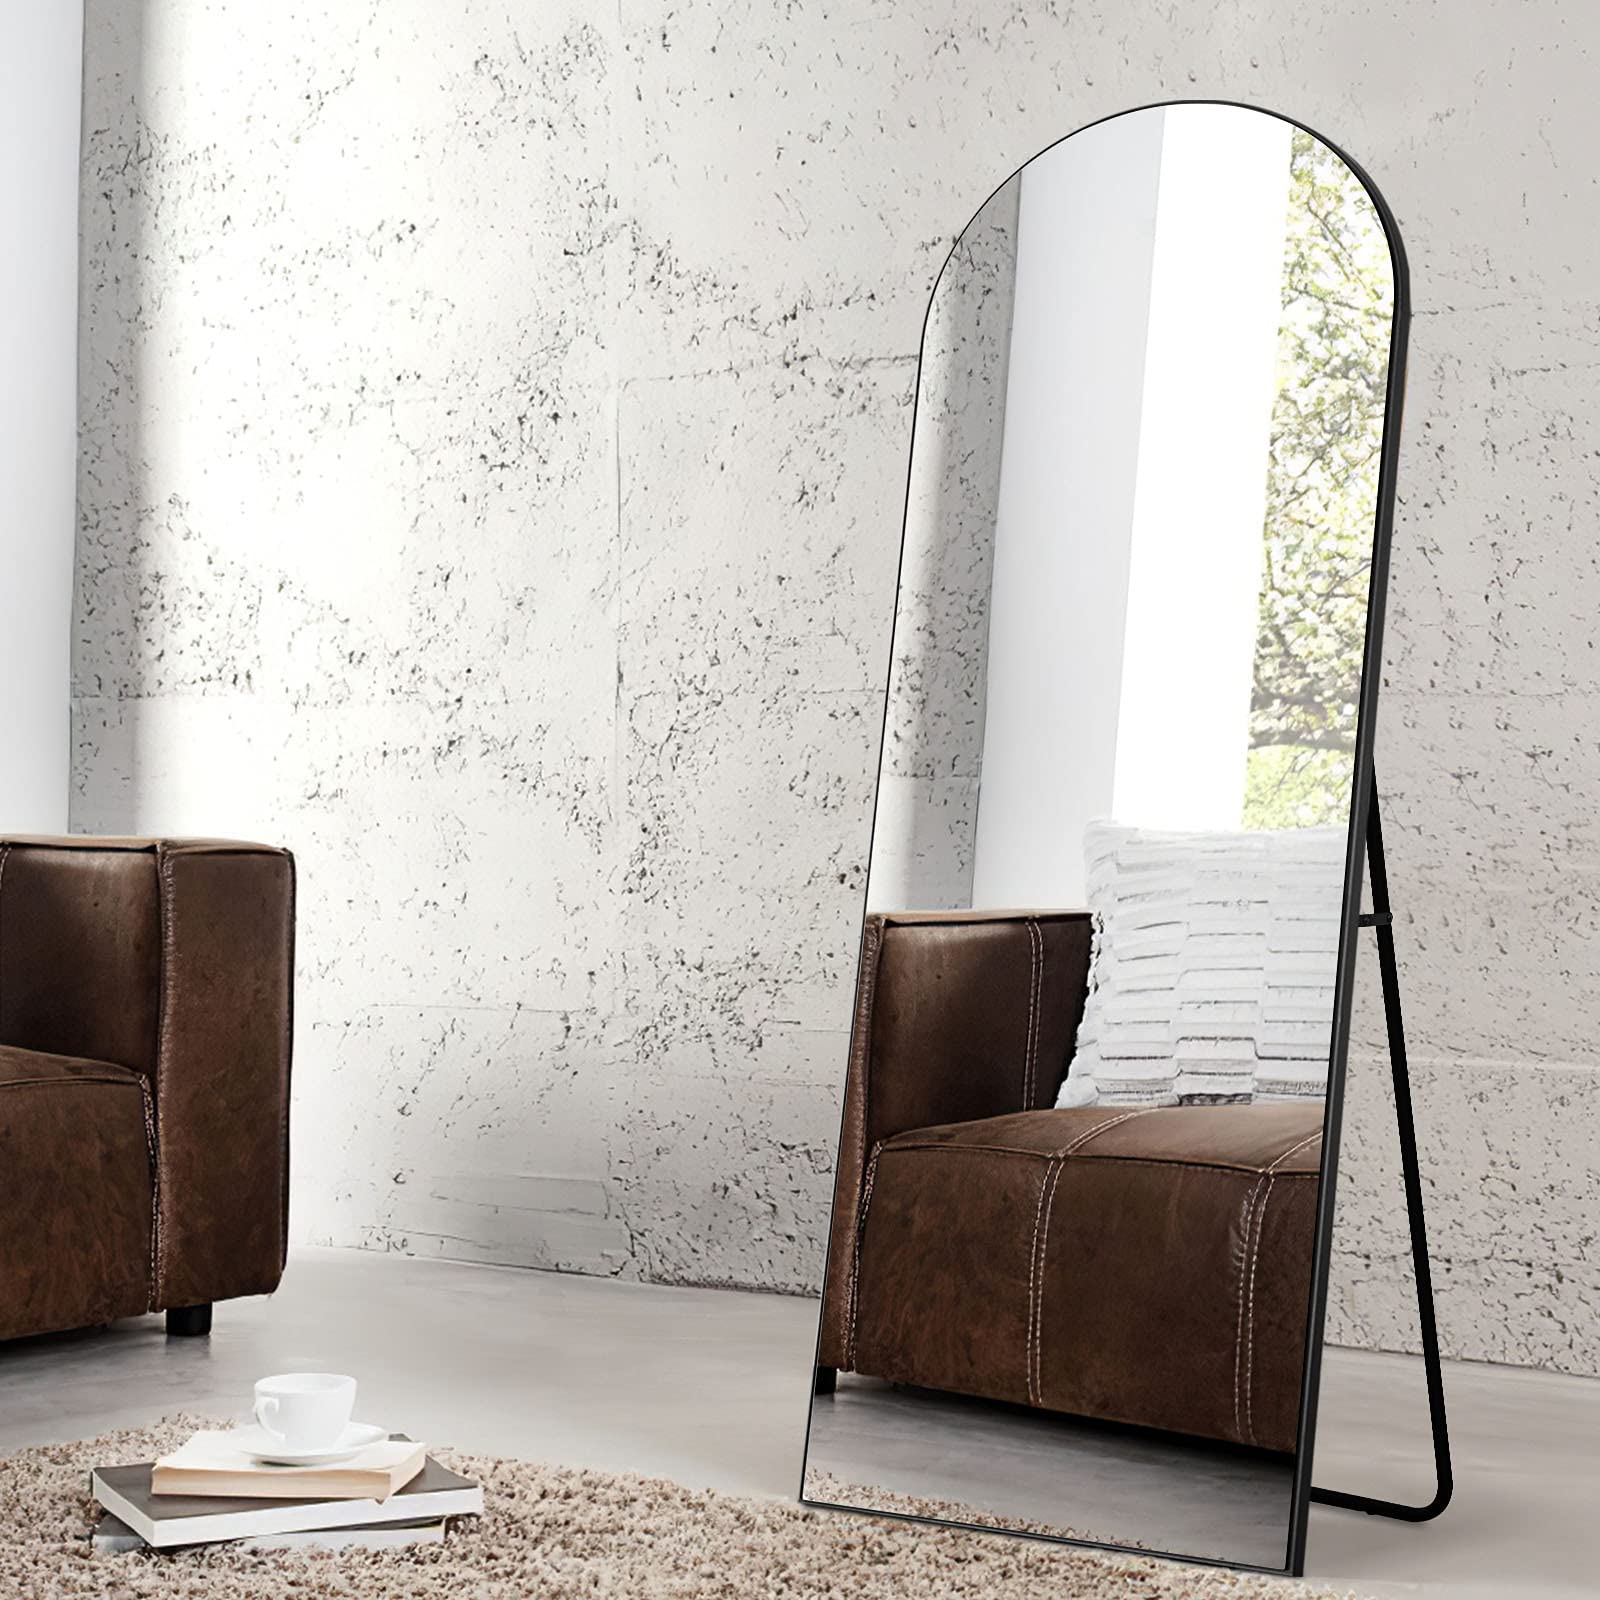 NeuType 71x24 Arched Full Length Mirror Large Arched Mirror Floor Mirror with Stand Large Bedroom Mirror Arched Shape Wall Mount